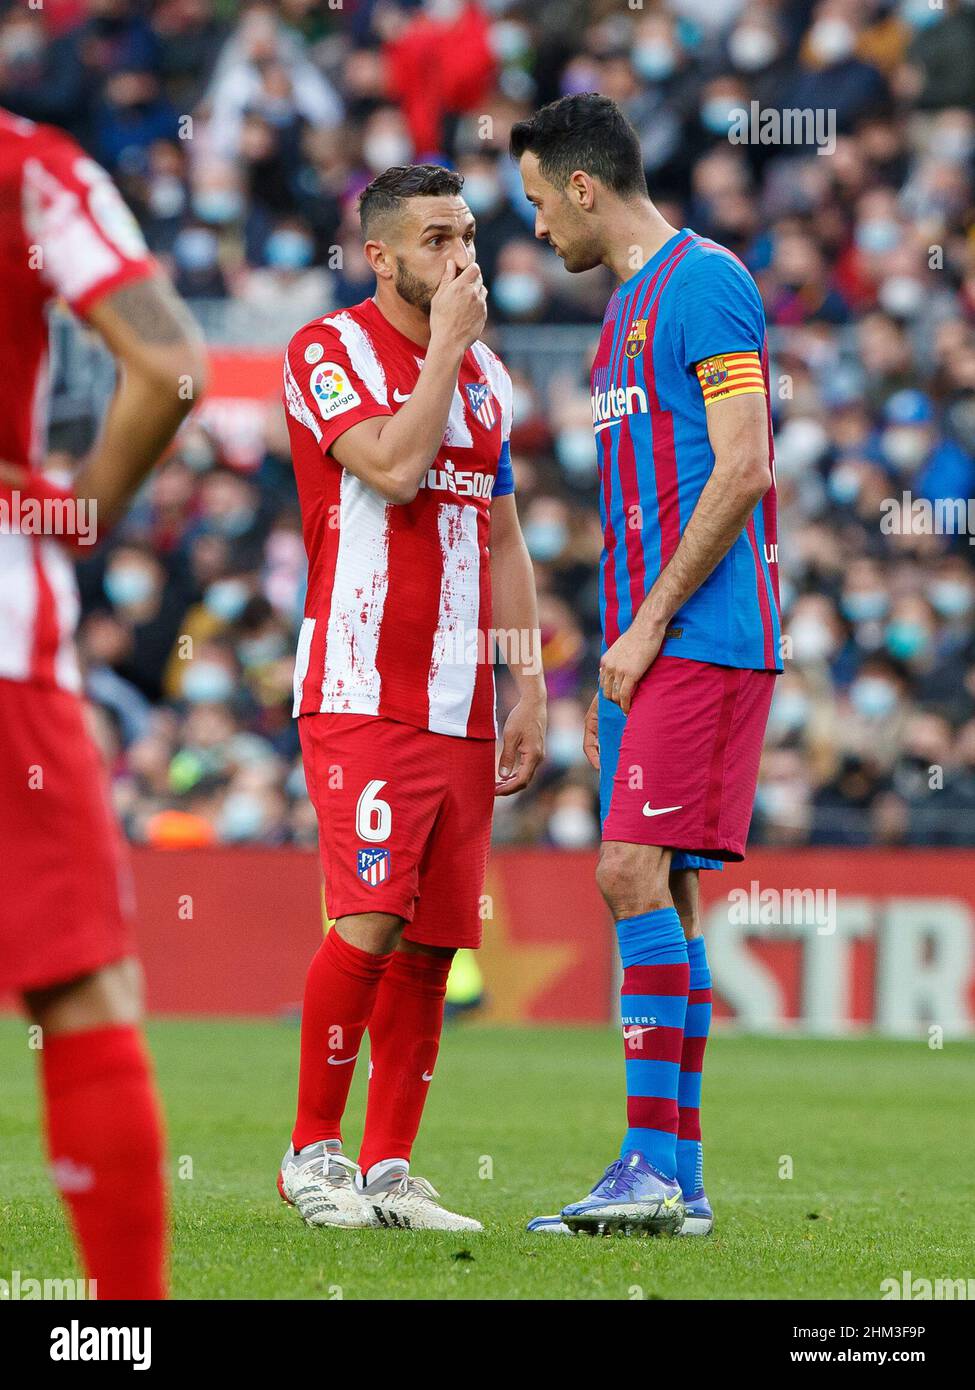 Barcelona, Spain. 06th Feb, 2022. Koke of Atletico de Madrid eith Sergio Busquets of FC Barcelona during the Liga match between FC Barcelona and Atletico de Madrid at Camp Nou in Barcelona, Spain. Credit: DAX Images/Alamy Live News Stock Photo